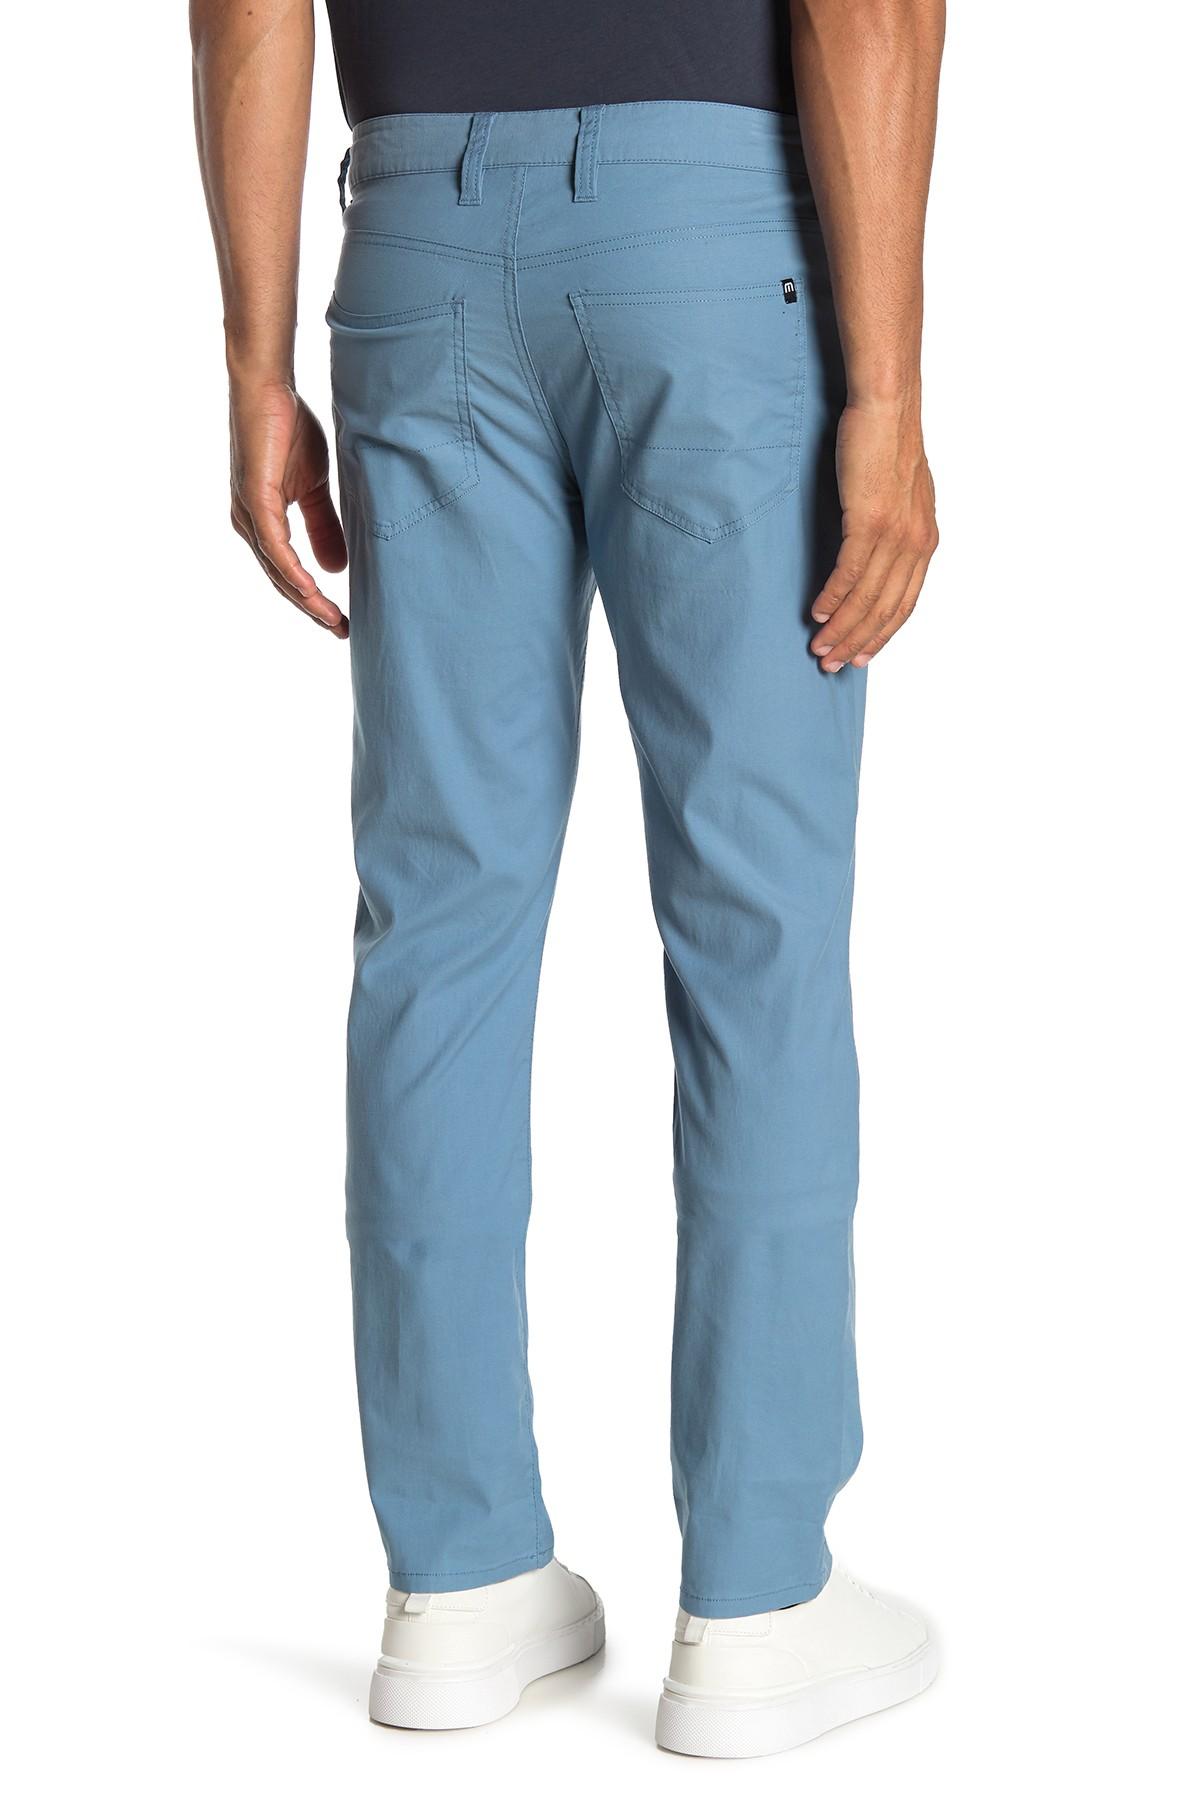 Travis Mathew Cotton Trifecta Tailored Fit Pants in Blue for Men - Lyst